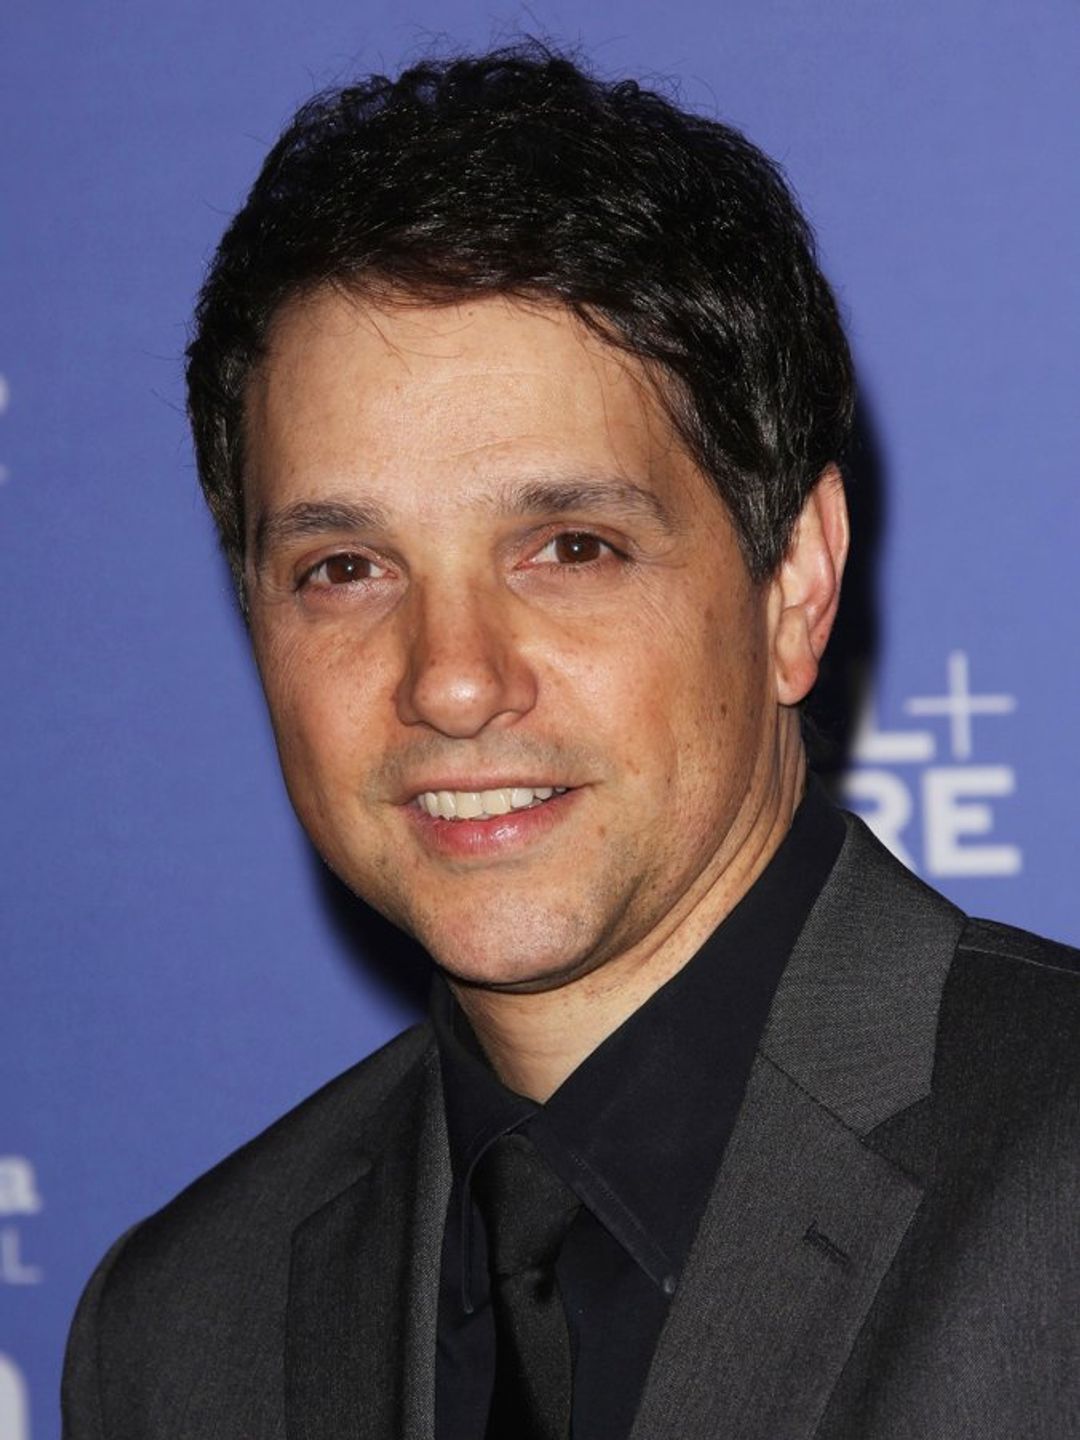 Ralph Macchio in his youth